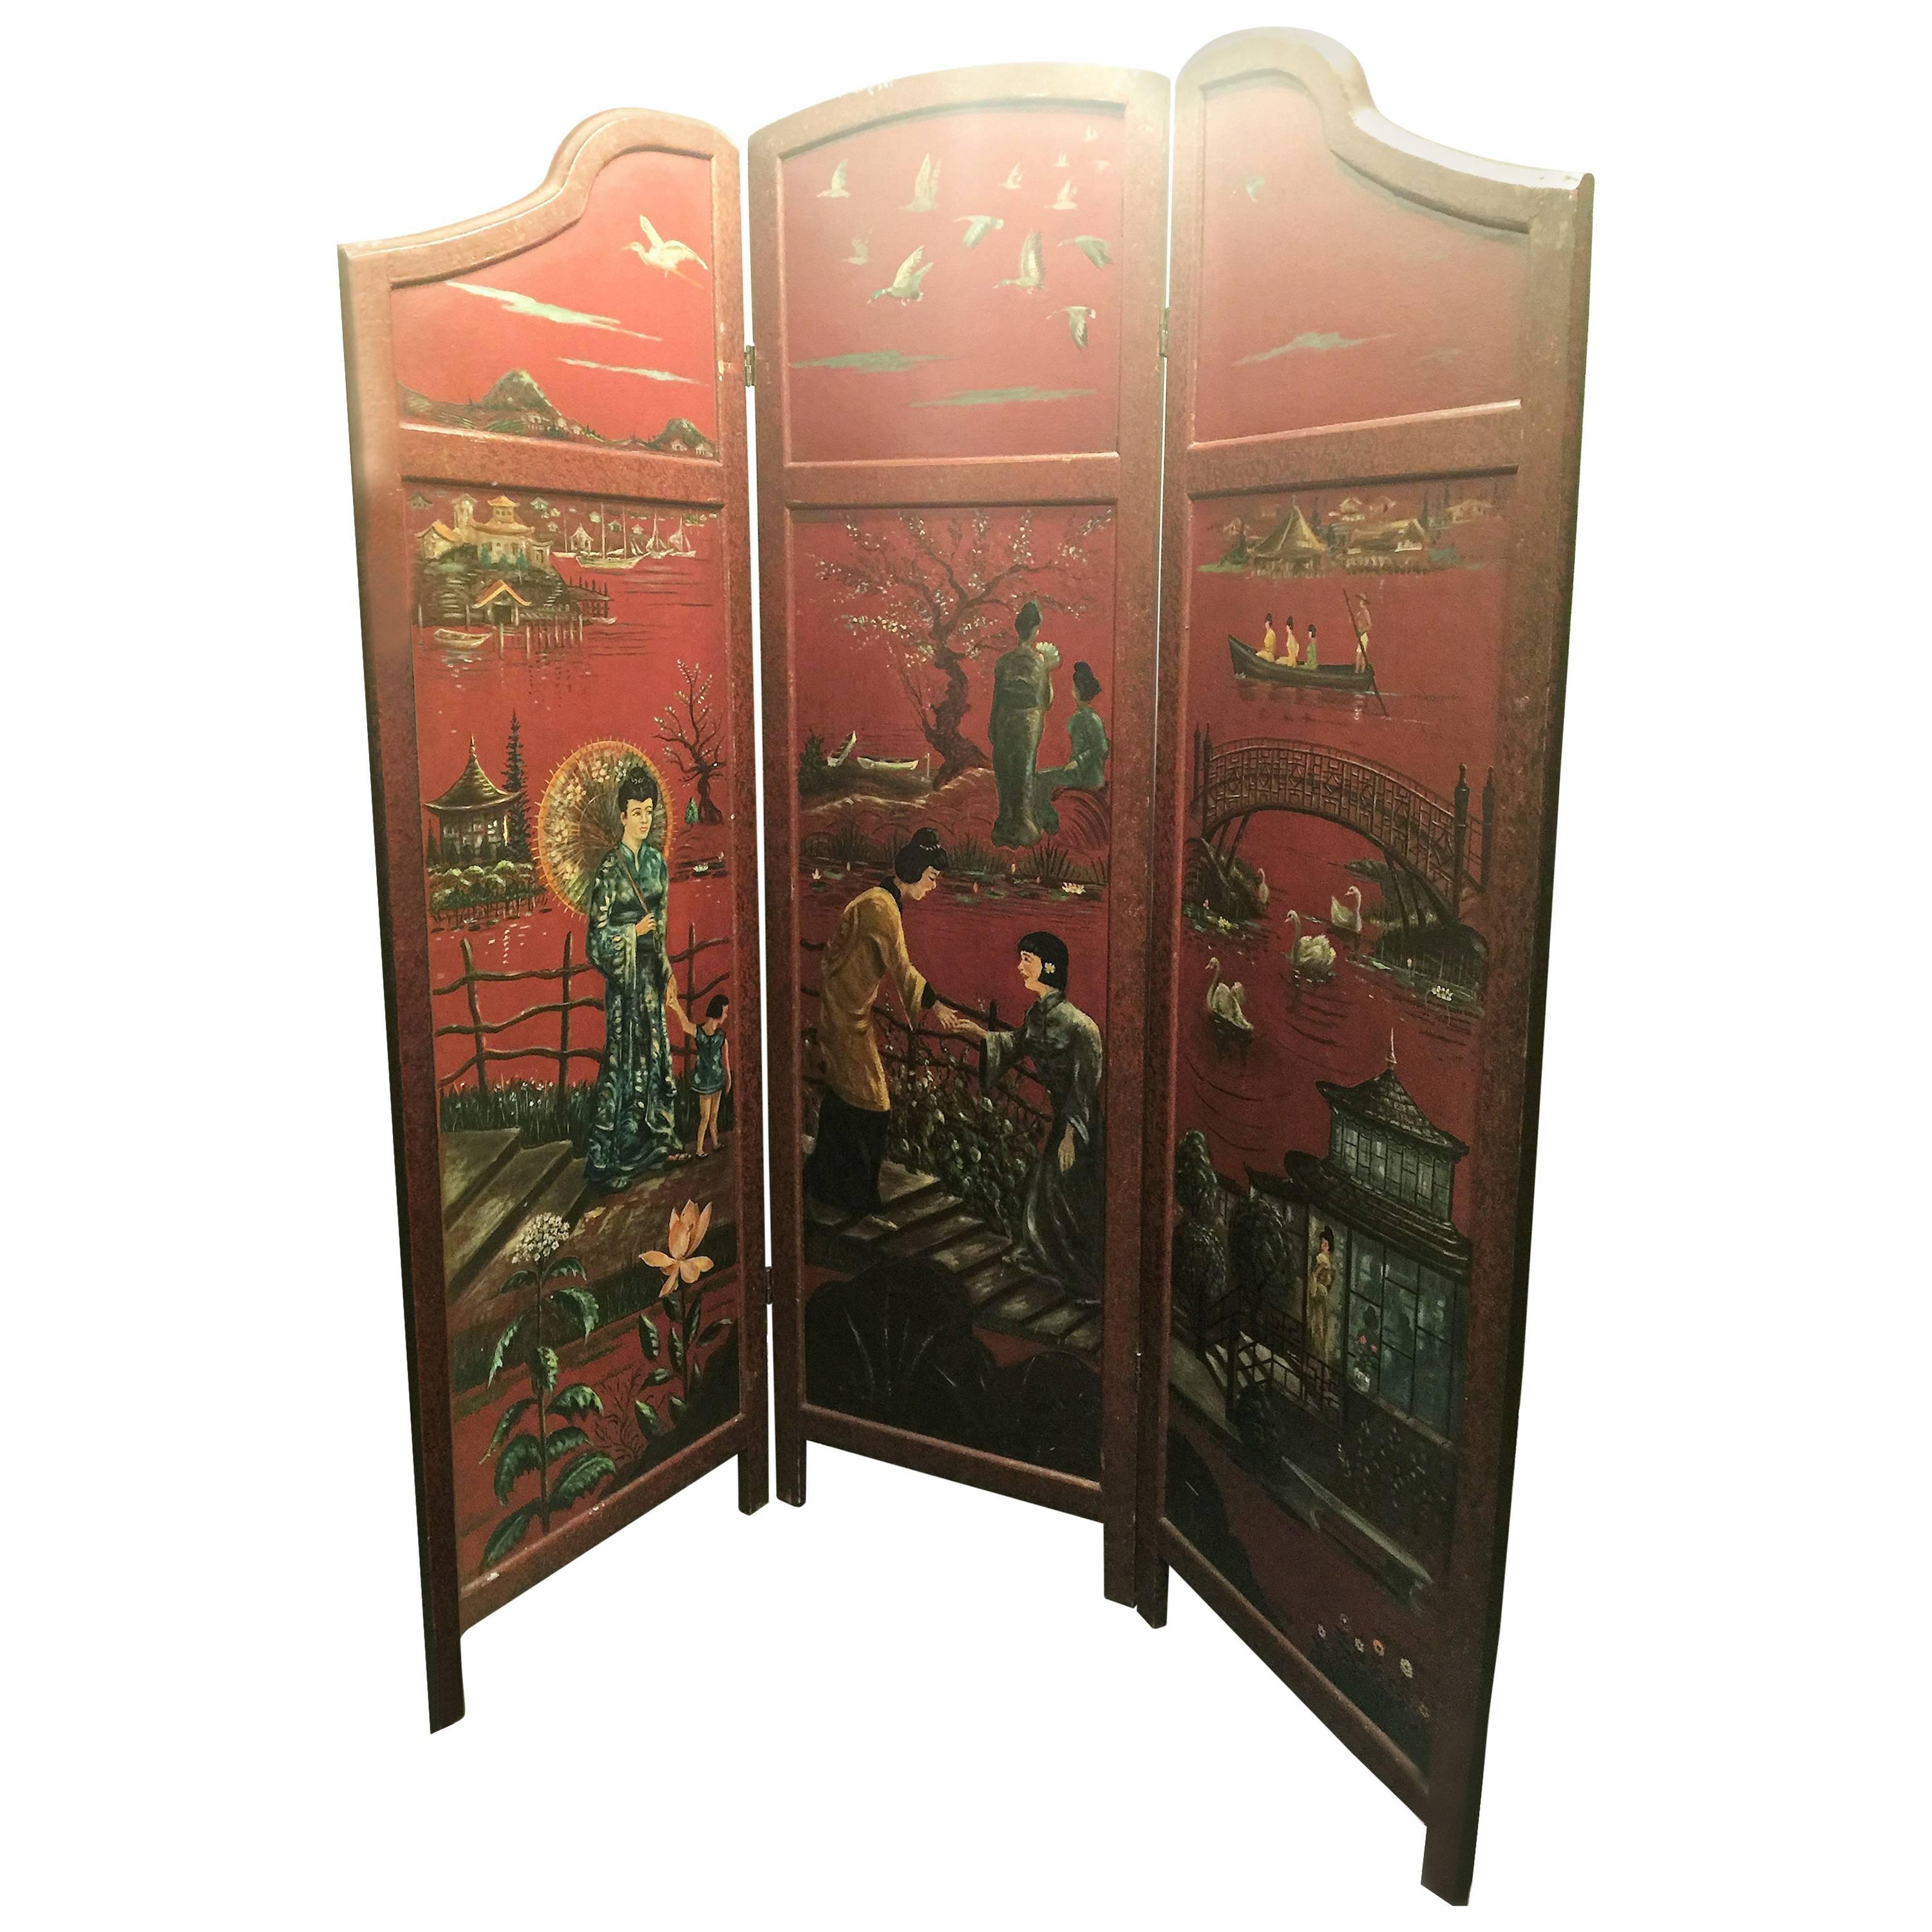 Wonderful 1940s Decorative Double Sided Painted Scenic Wooden Room Screen For Sale